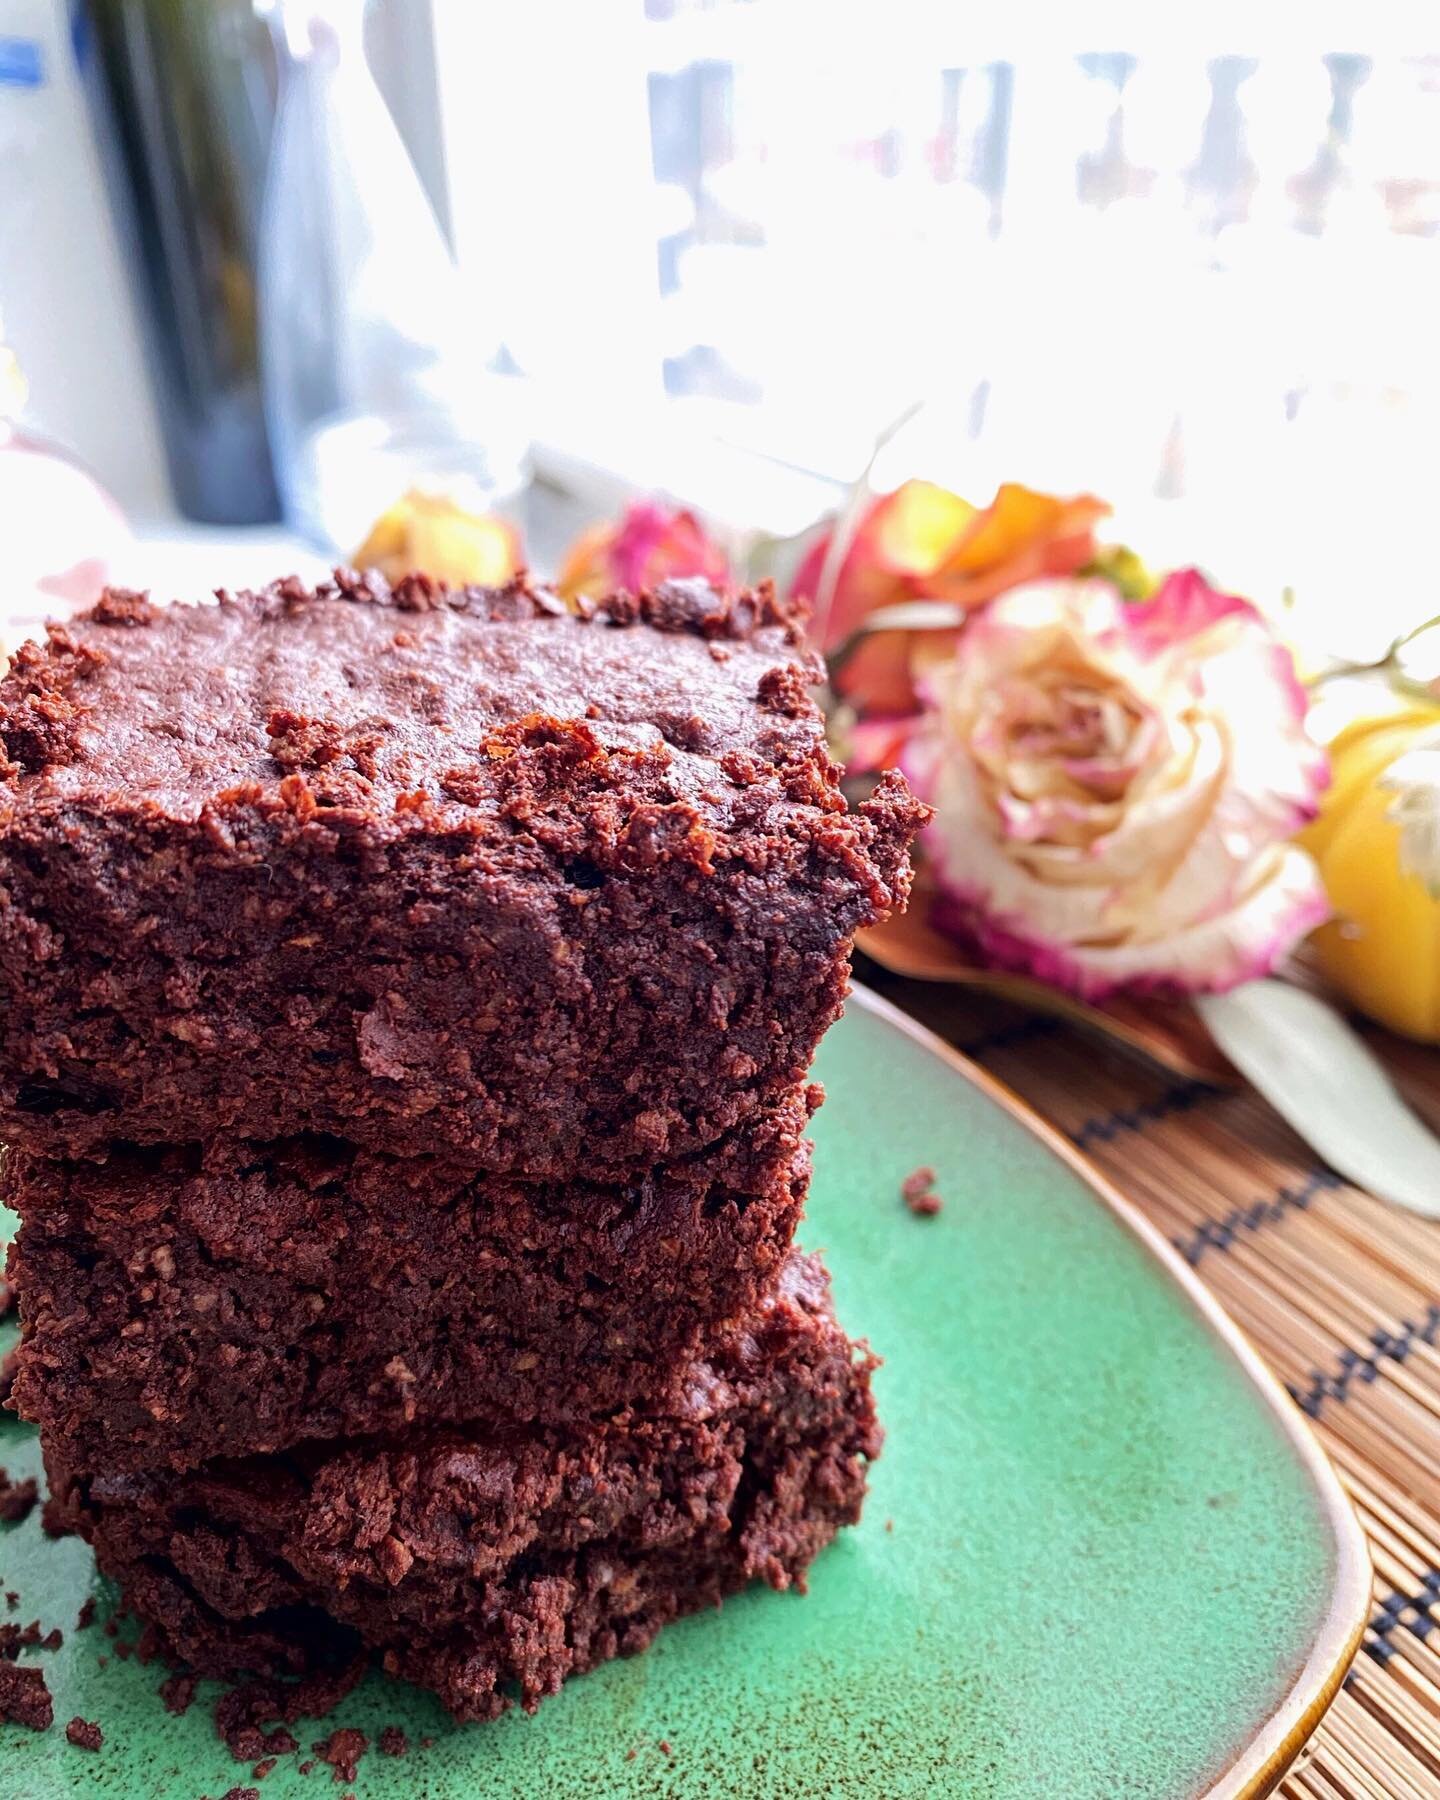 oat flour brownies🍫
⁣
OoOooOoo 😗😗😗deez brownies tho!! 😍Tried @leeks.and.lemons brownie recipe out and it was hella choc👏🏼late👏🏼tey👏🏼 They were a bit drier than I would have liked so maybe next time I'll add more fat/moisture. I tweaked the